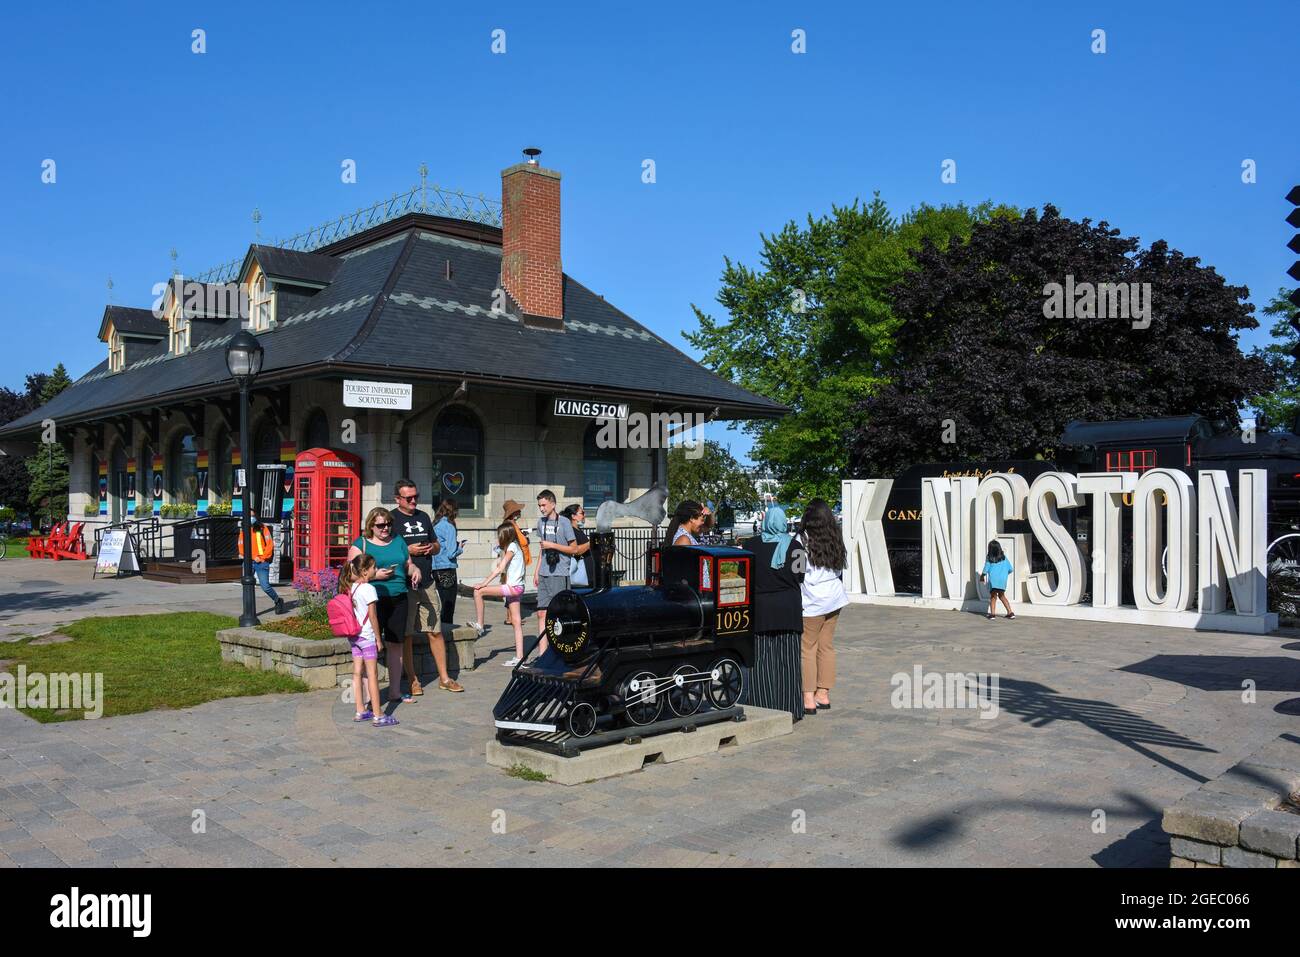 Kingston, Canada - August 15, 2021: The Kingston Ontario Visitor Information Centre, formerly a train station, with a sign for tourists to pose with, Stock Photo